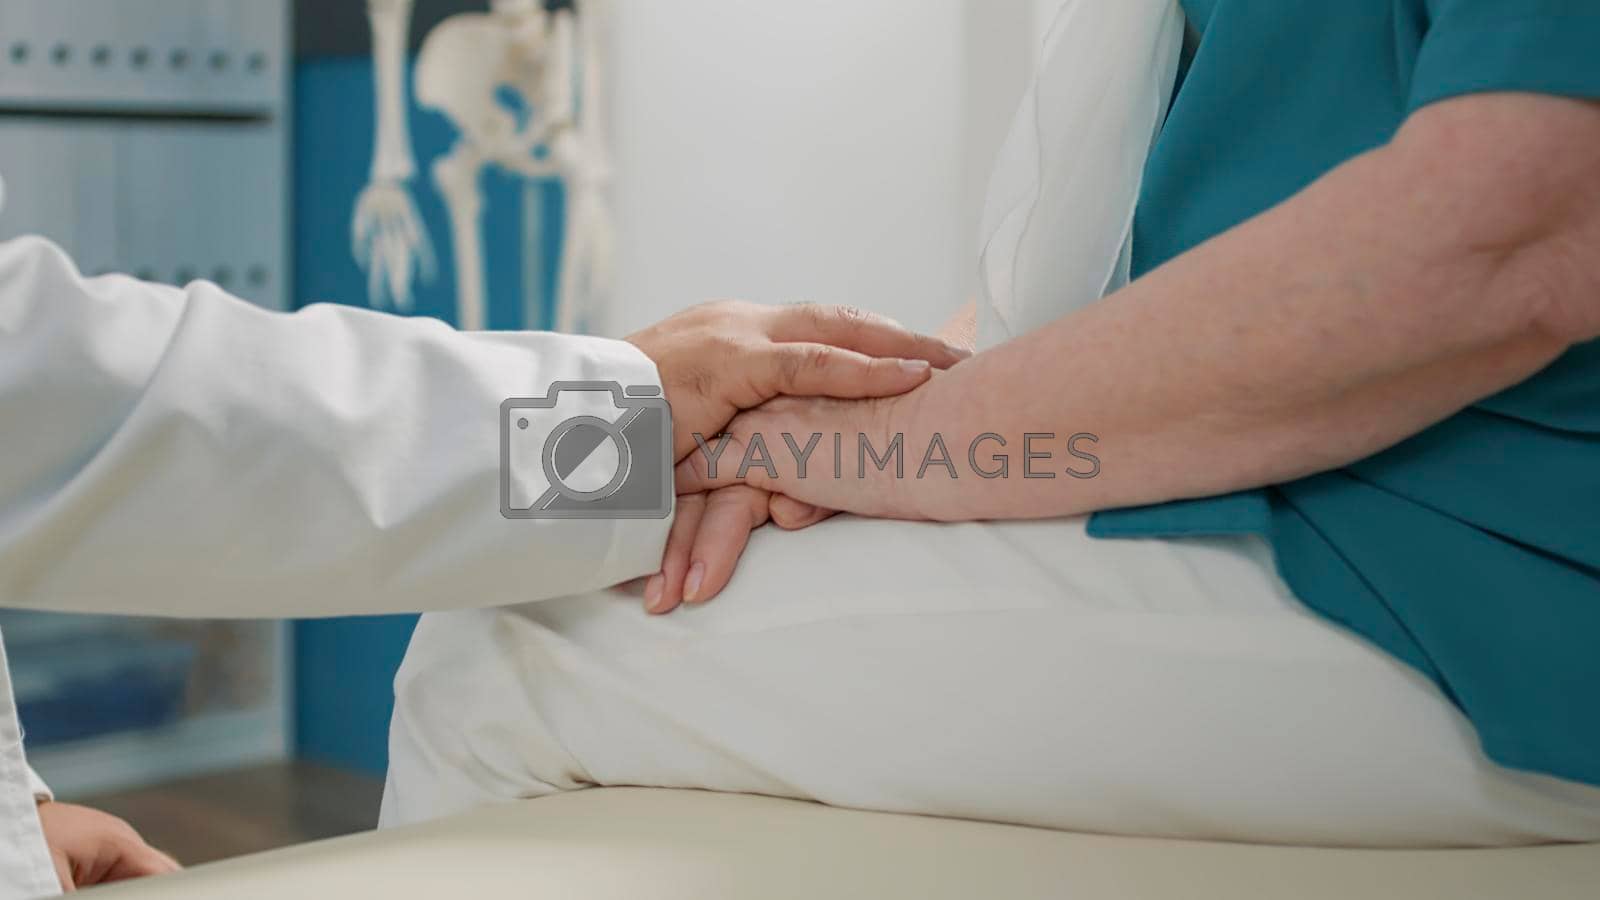 Royalty free image of Physician showing compassion to old patient at appointment by DCStudio